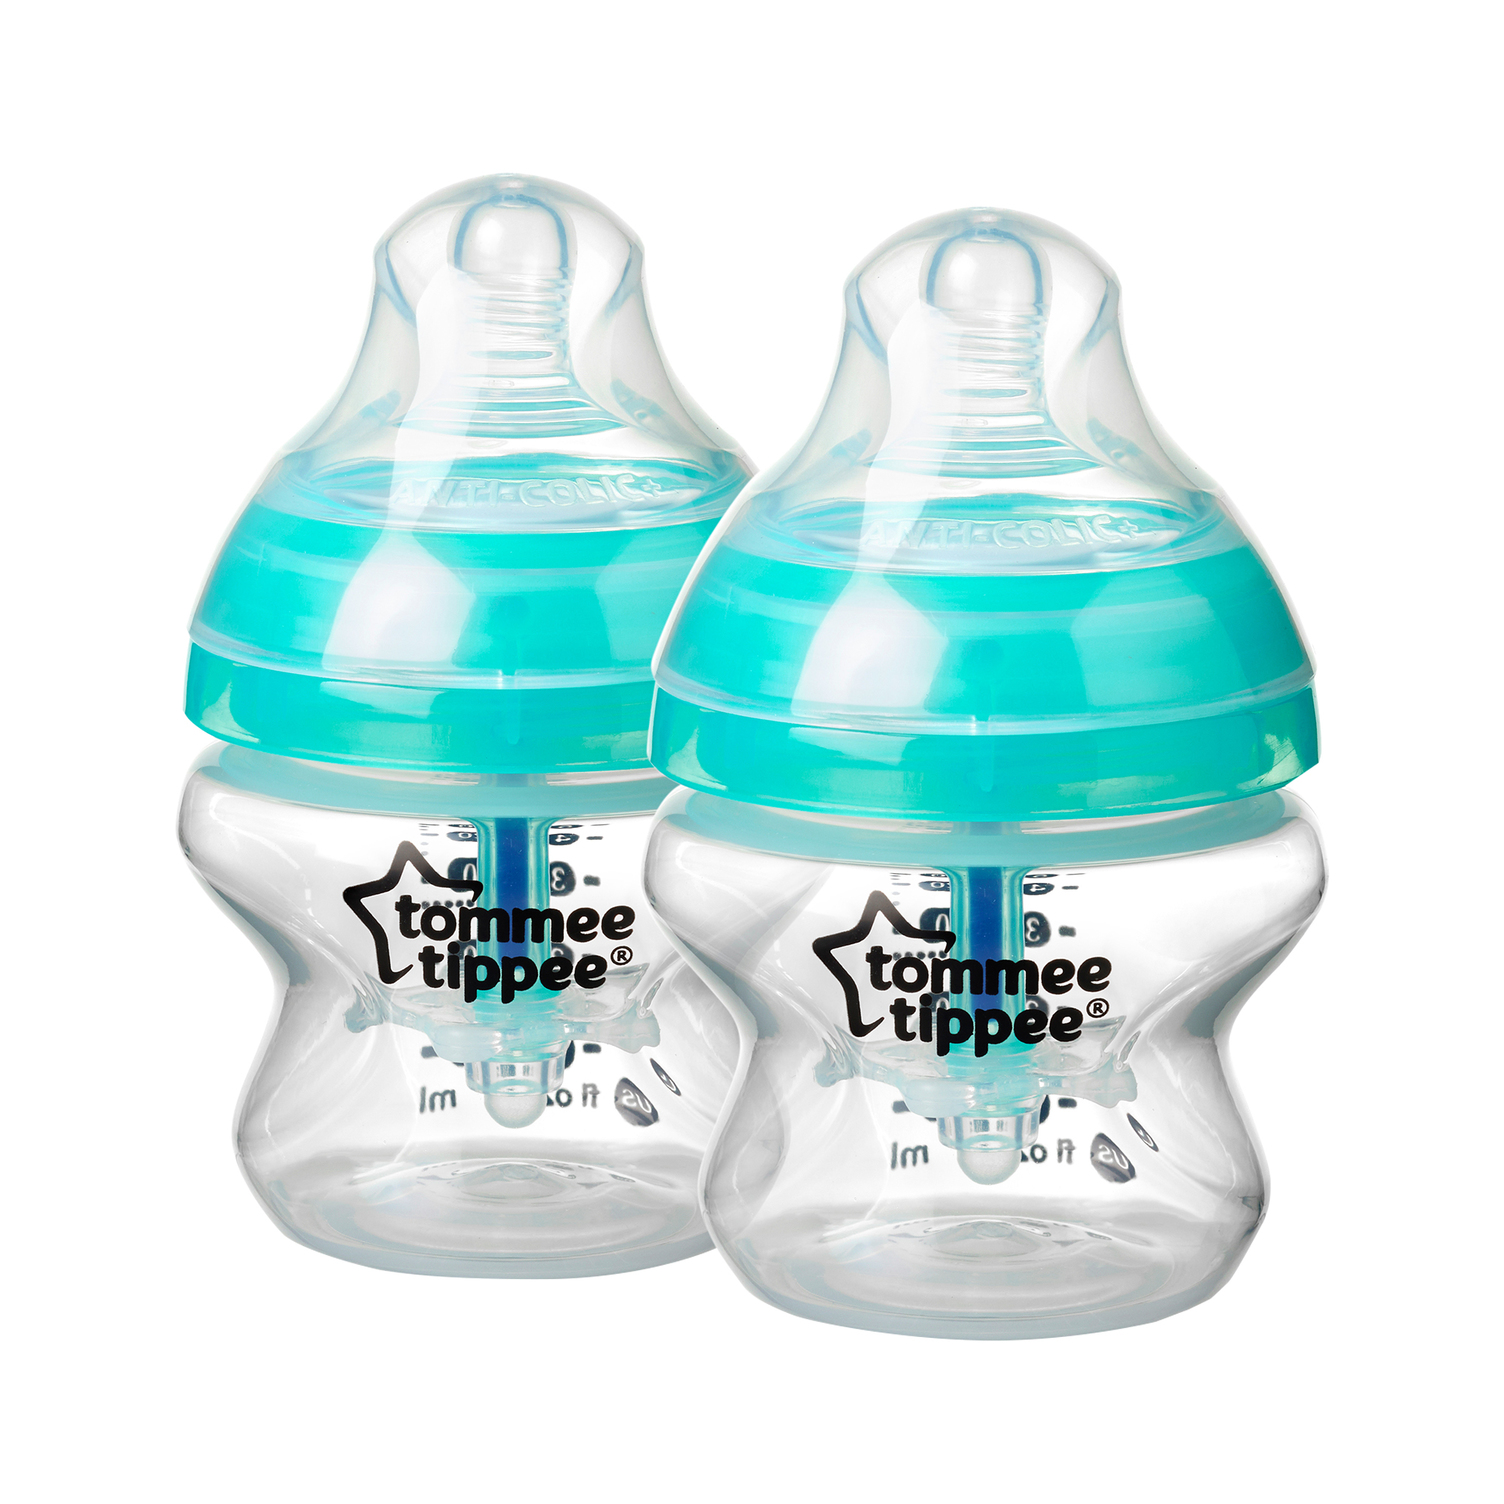 Tommee Tippee Advanced Anti-Colic Baby Bottles – 5oz, Clear, 2pk - image 1 of 10